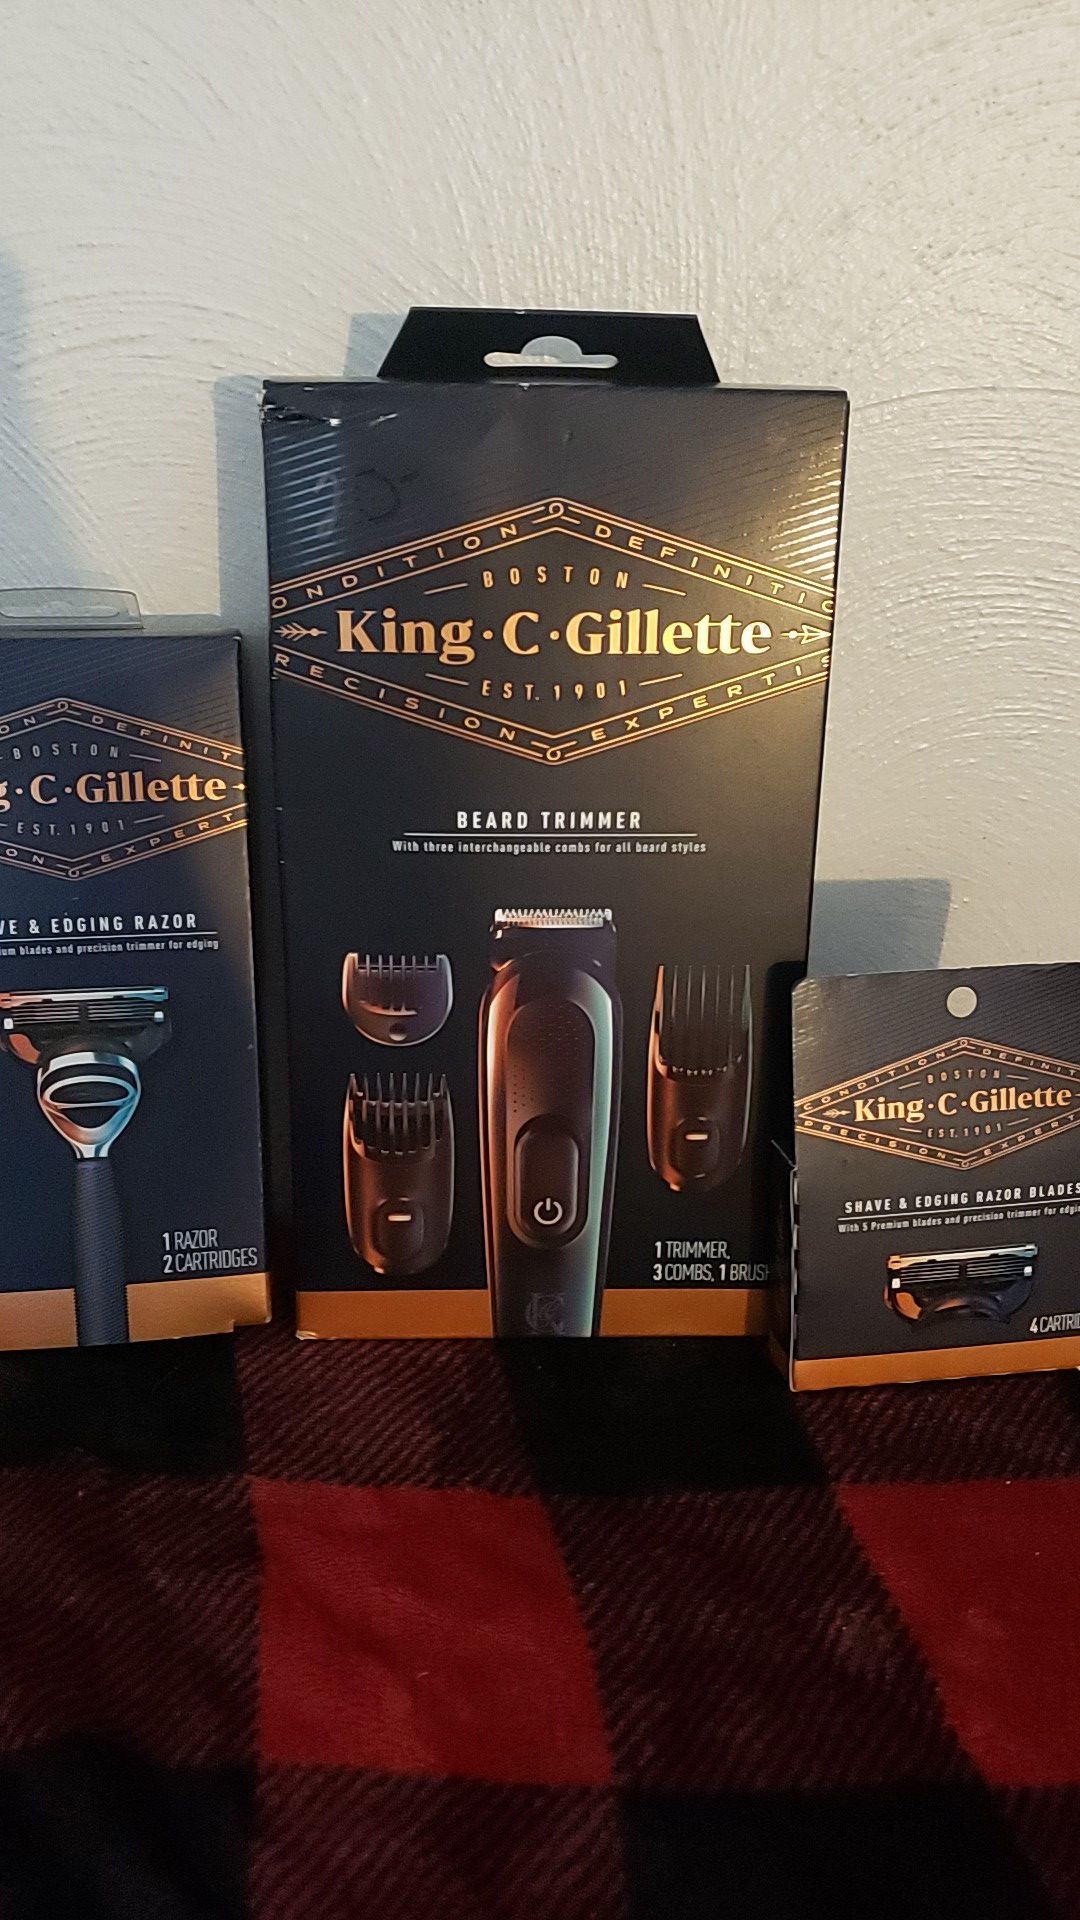 King beard trimmer and razor with blades